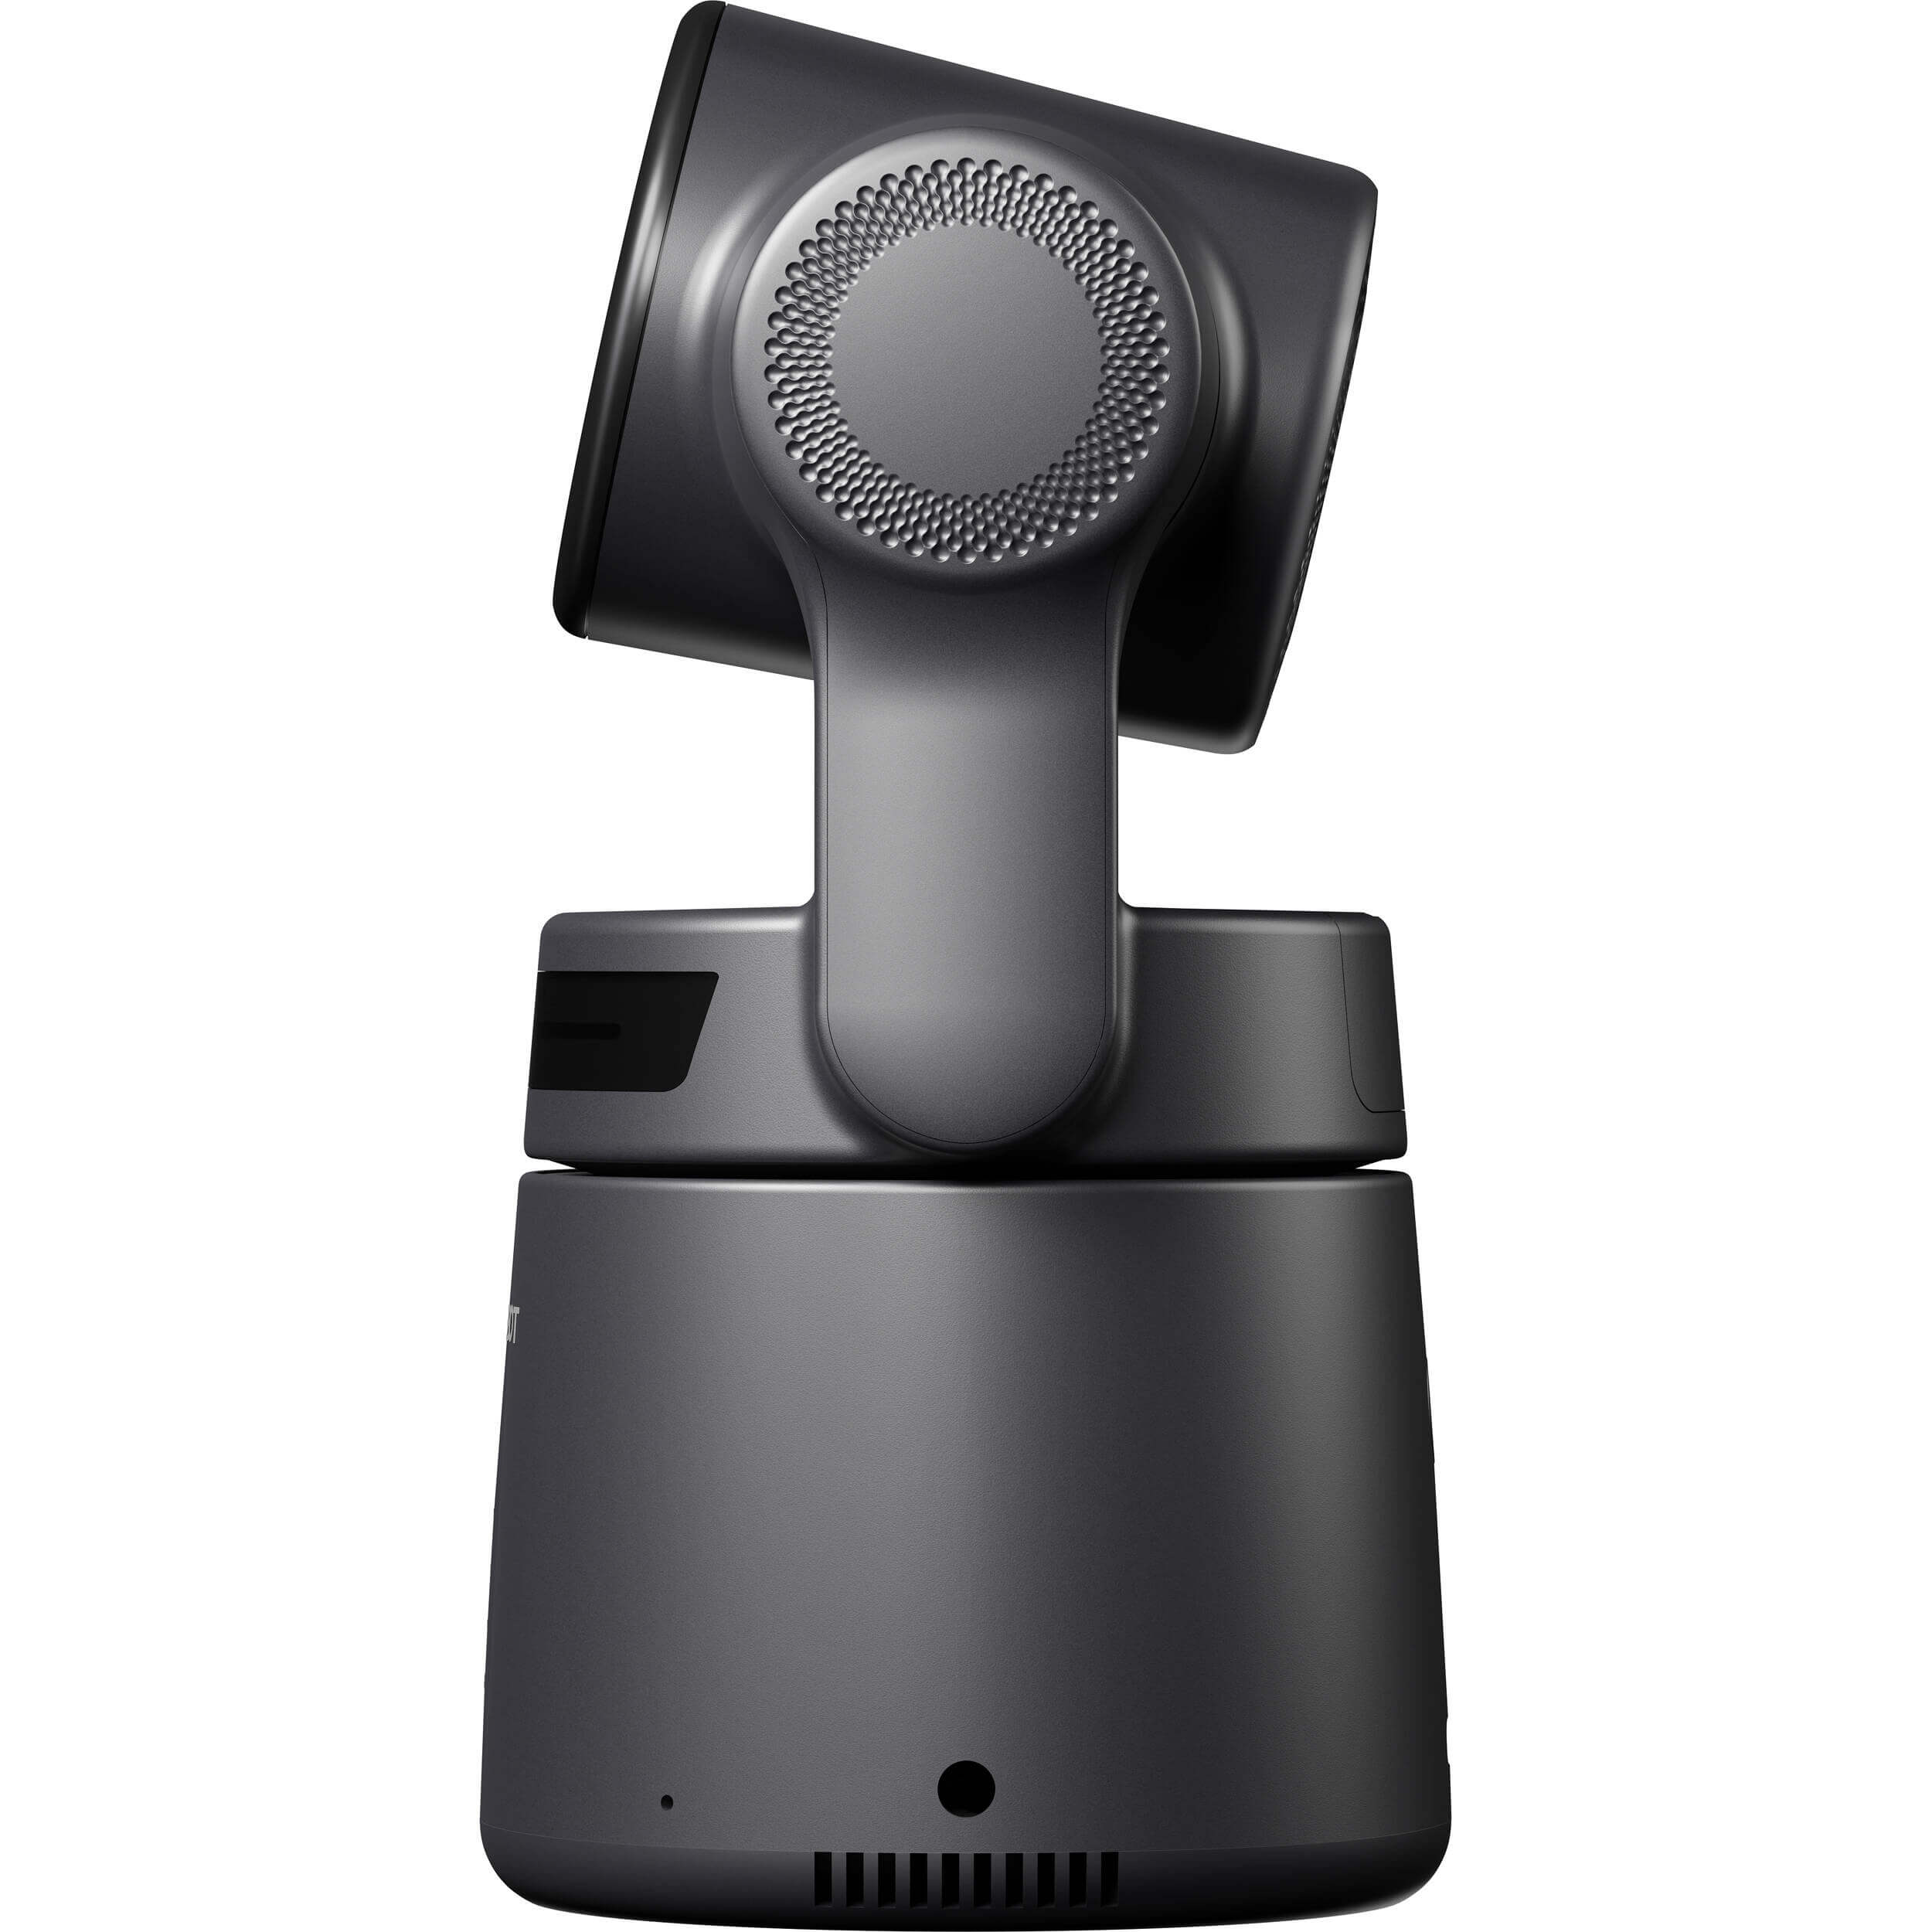 OBSBOT Tail Air - AI-Powered 4K PTZ Streaming Camera, left side